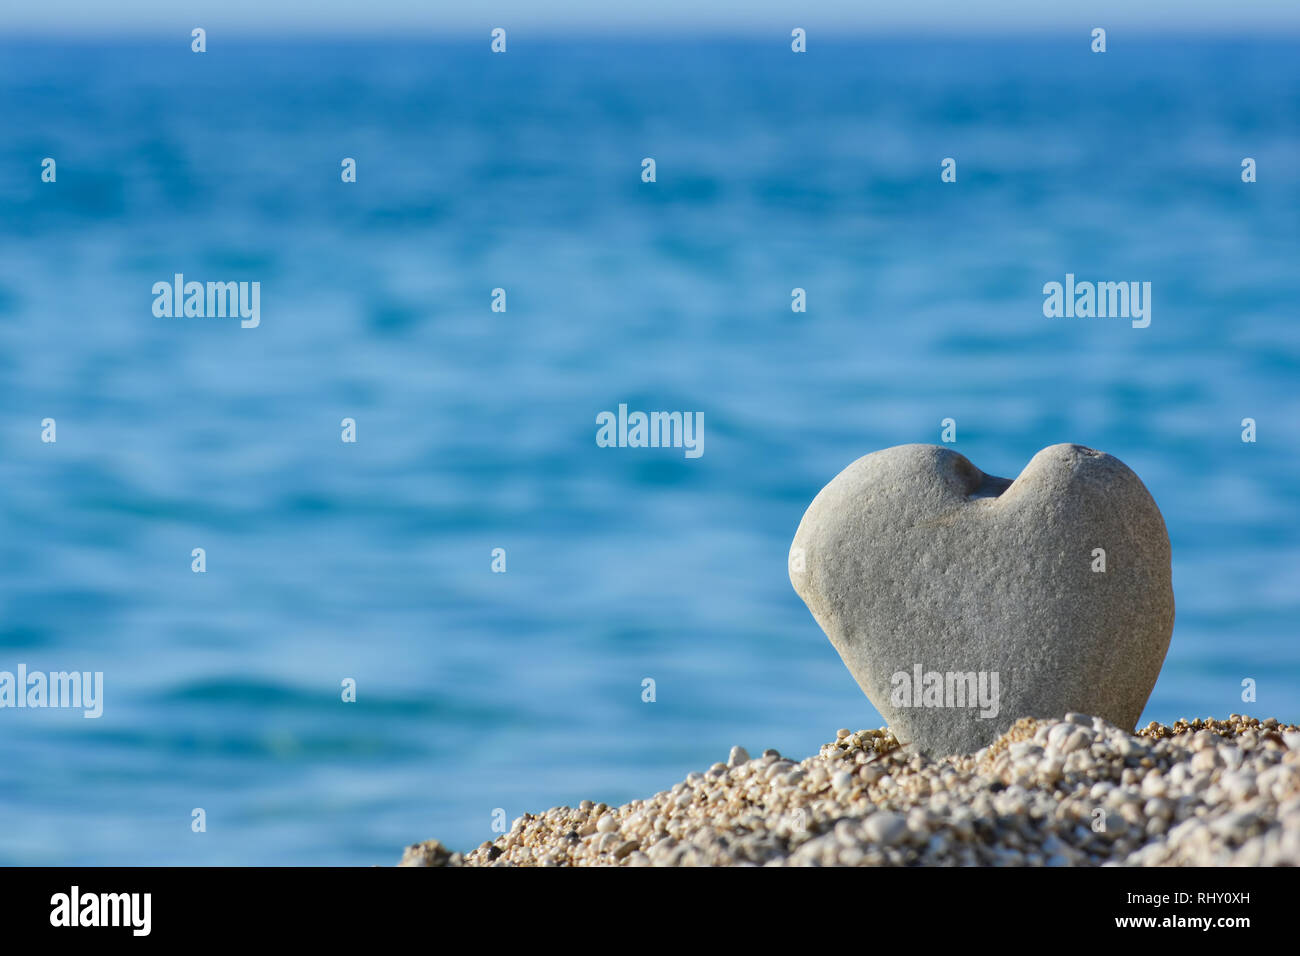 Big, grey heart shapped stone in a pebble on a beach against blurred sea and sky background, good as copy space Stock Photo